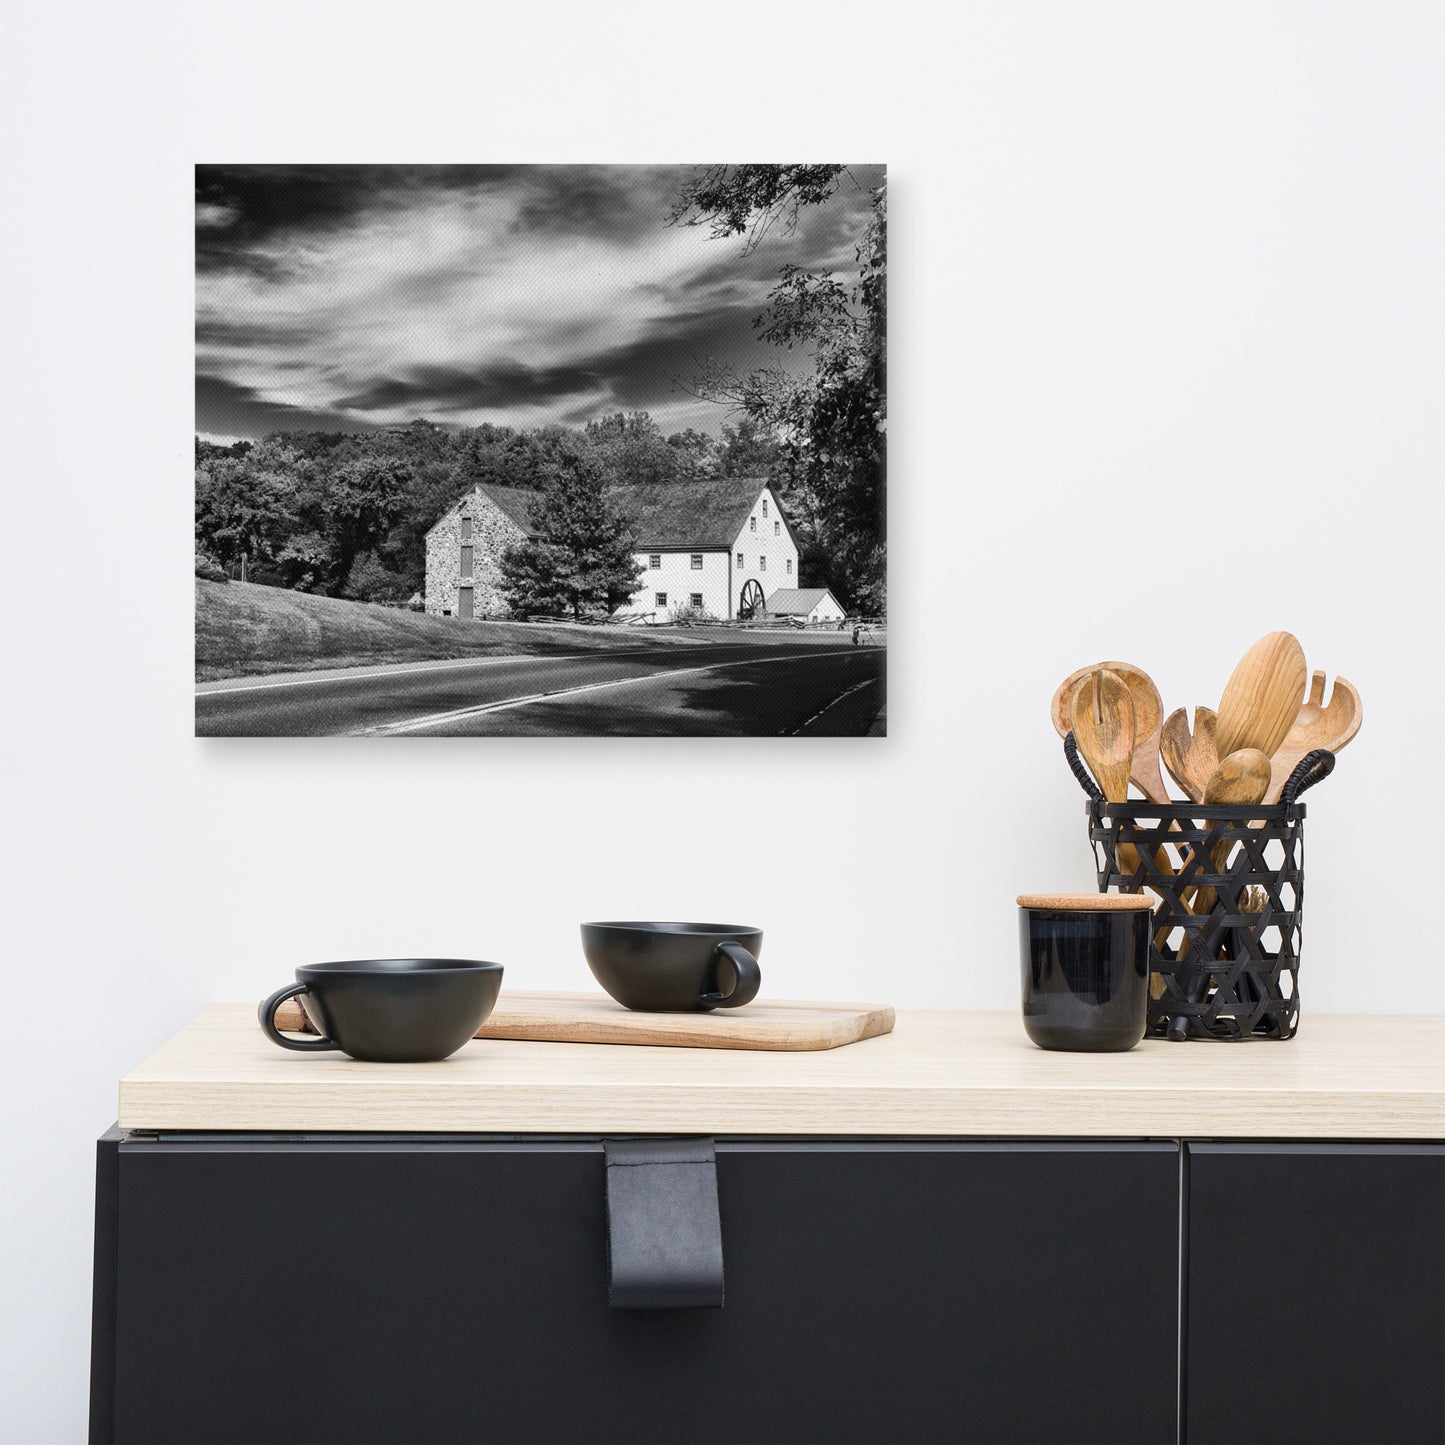 Greenbank Mill - Summer Black and White Rural Landscape Canvas Wall Art Prints